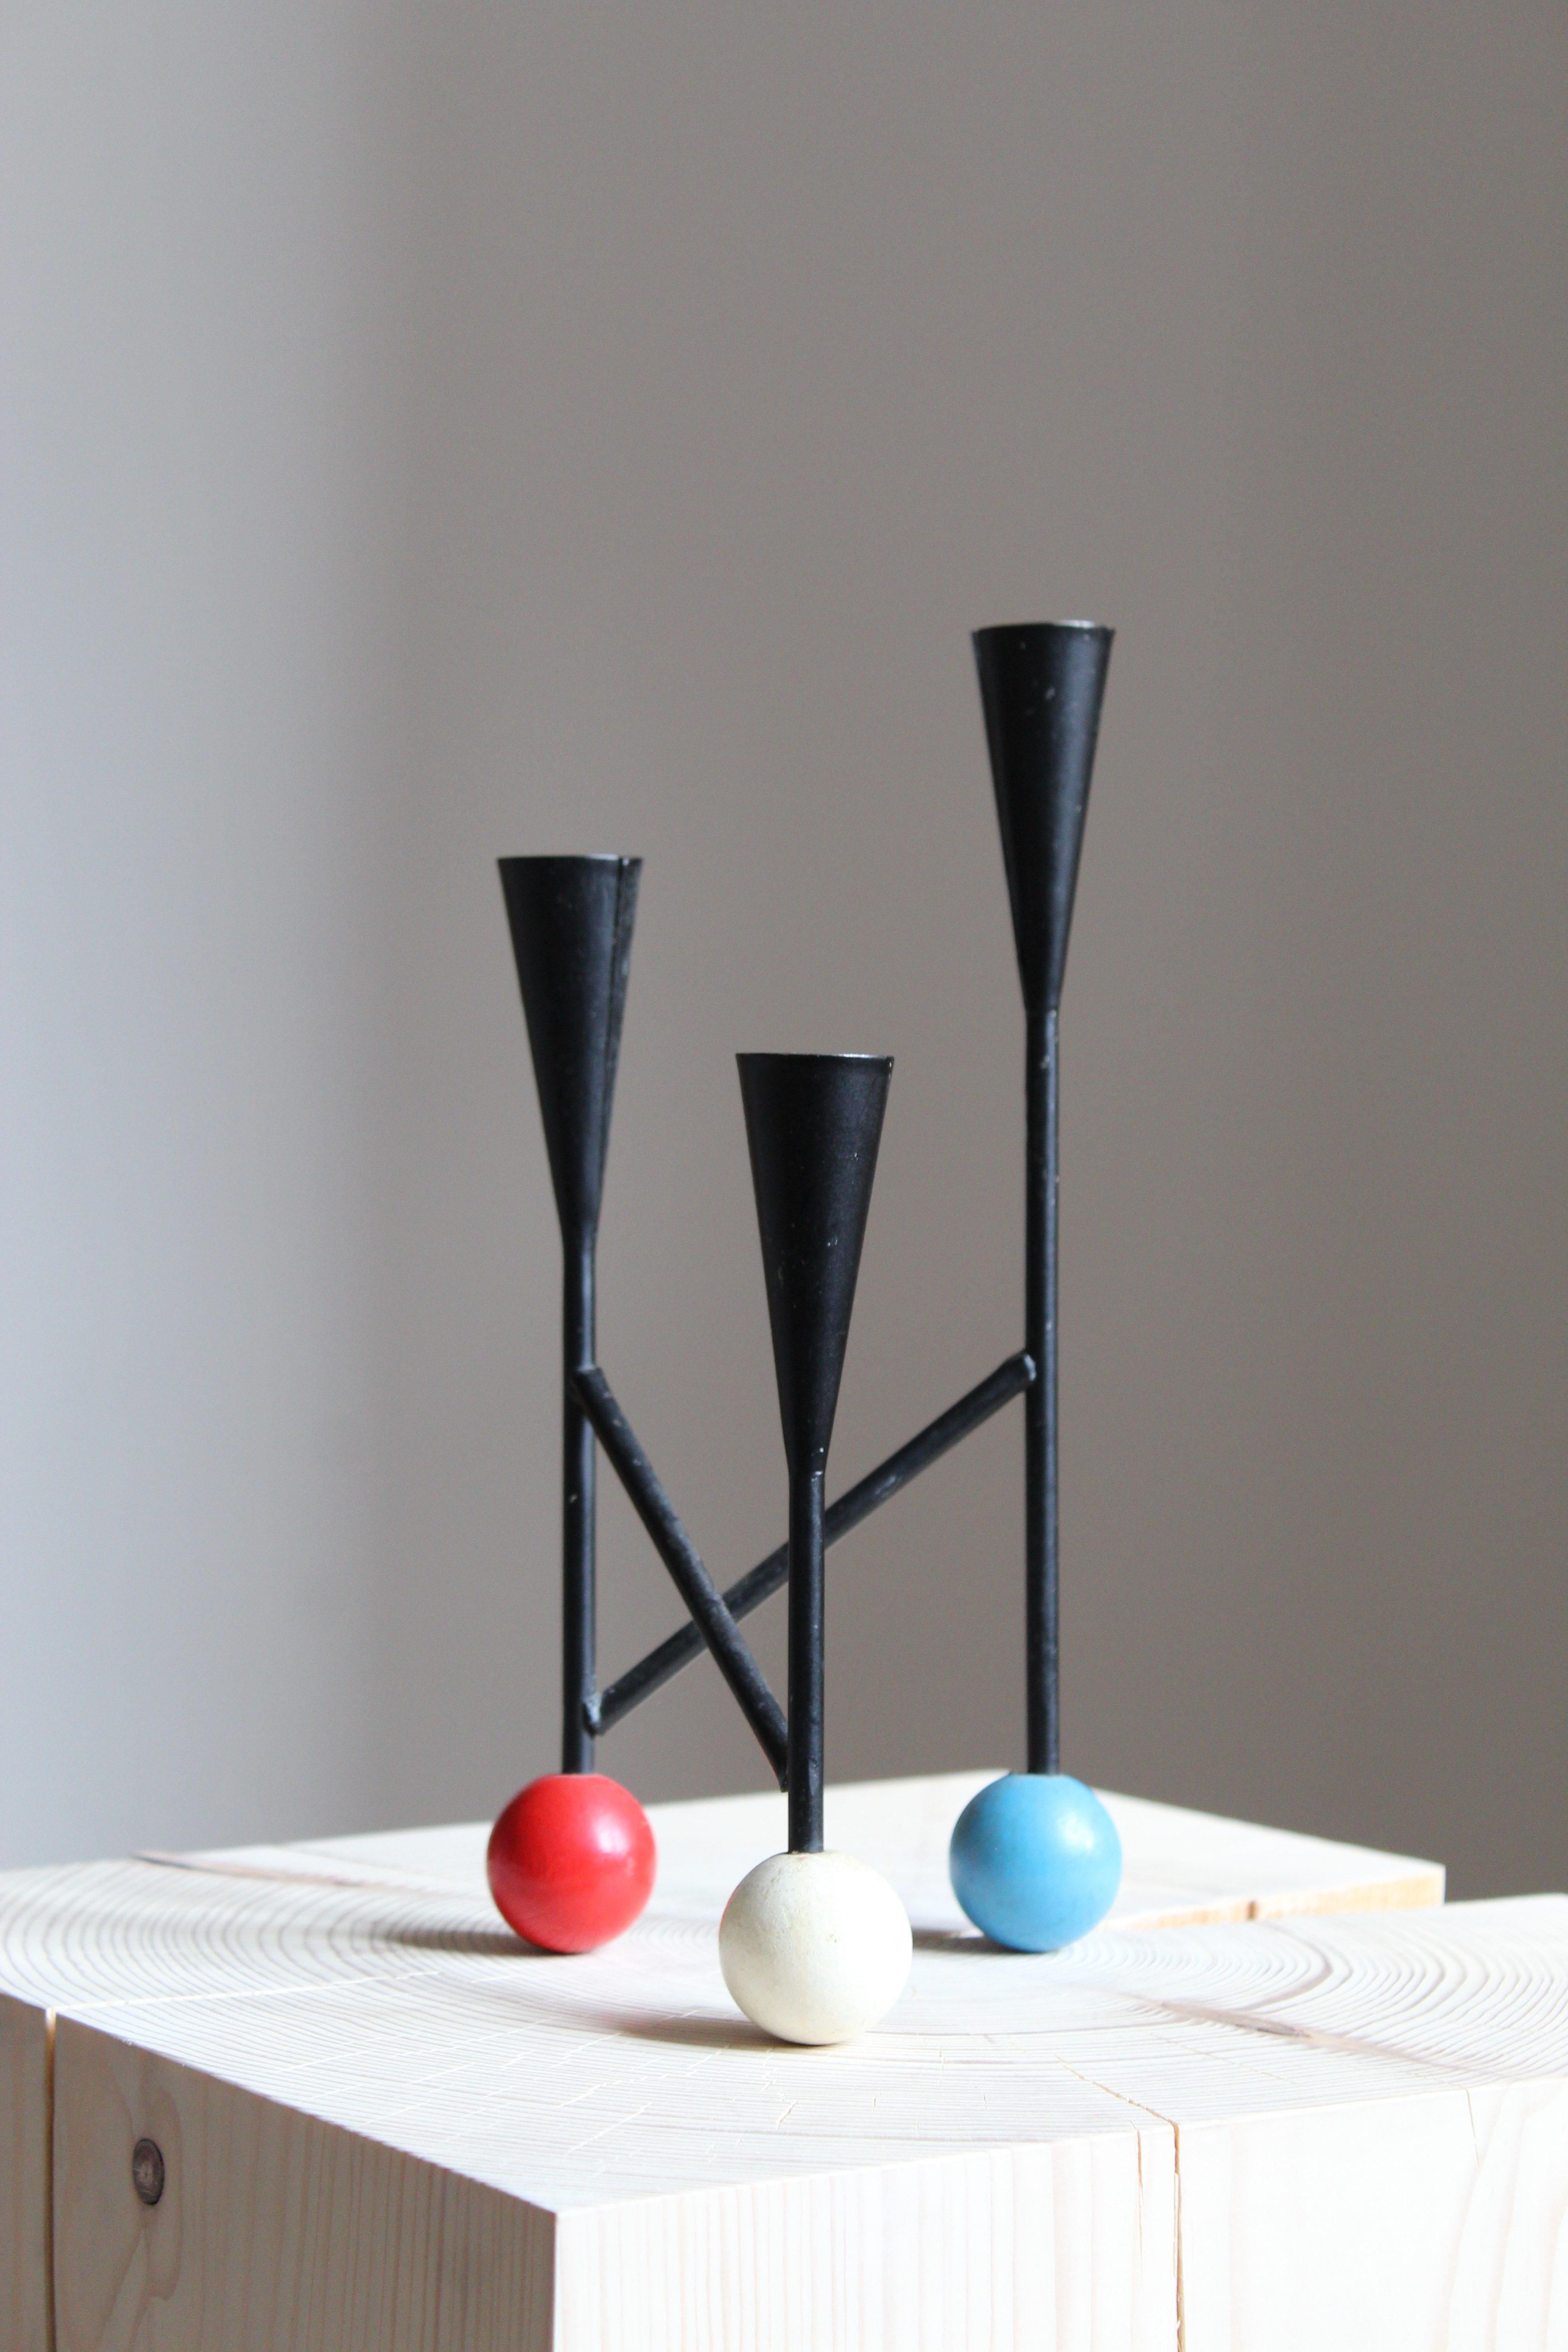 A small modernist candelabra or candle tree, circa 1970s. In black painted metal, wooden feet in white, blue and red. Fits 3 normal-sized Scandinavian candles.